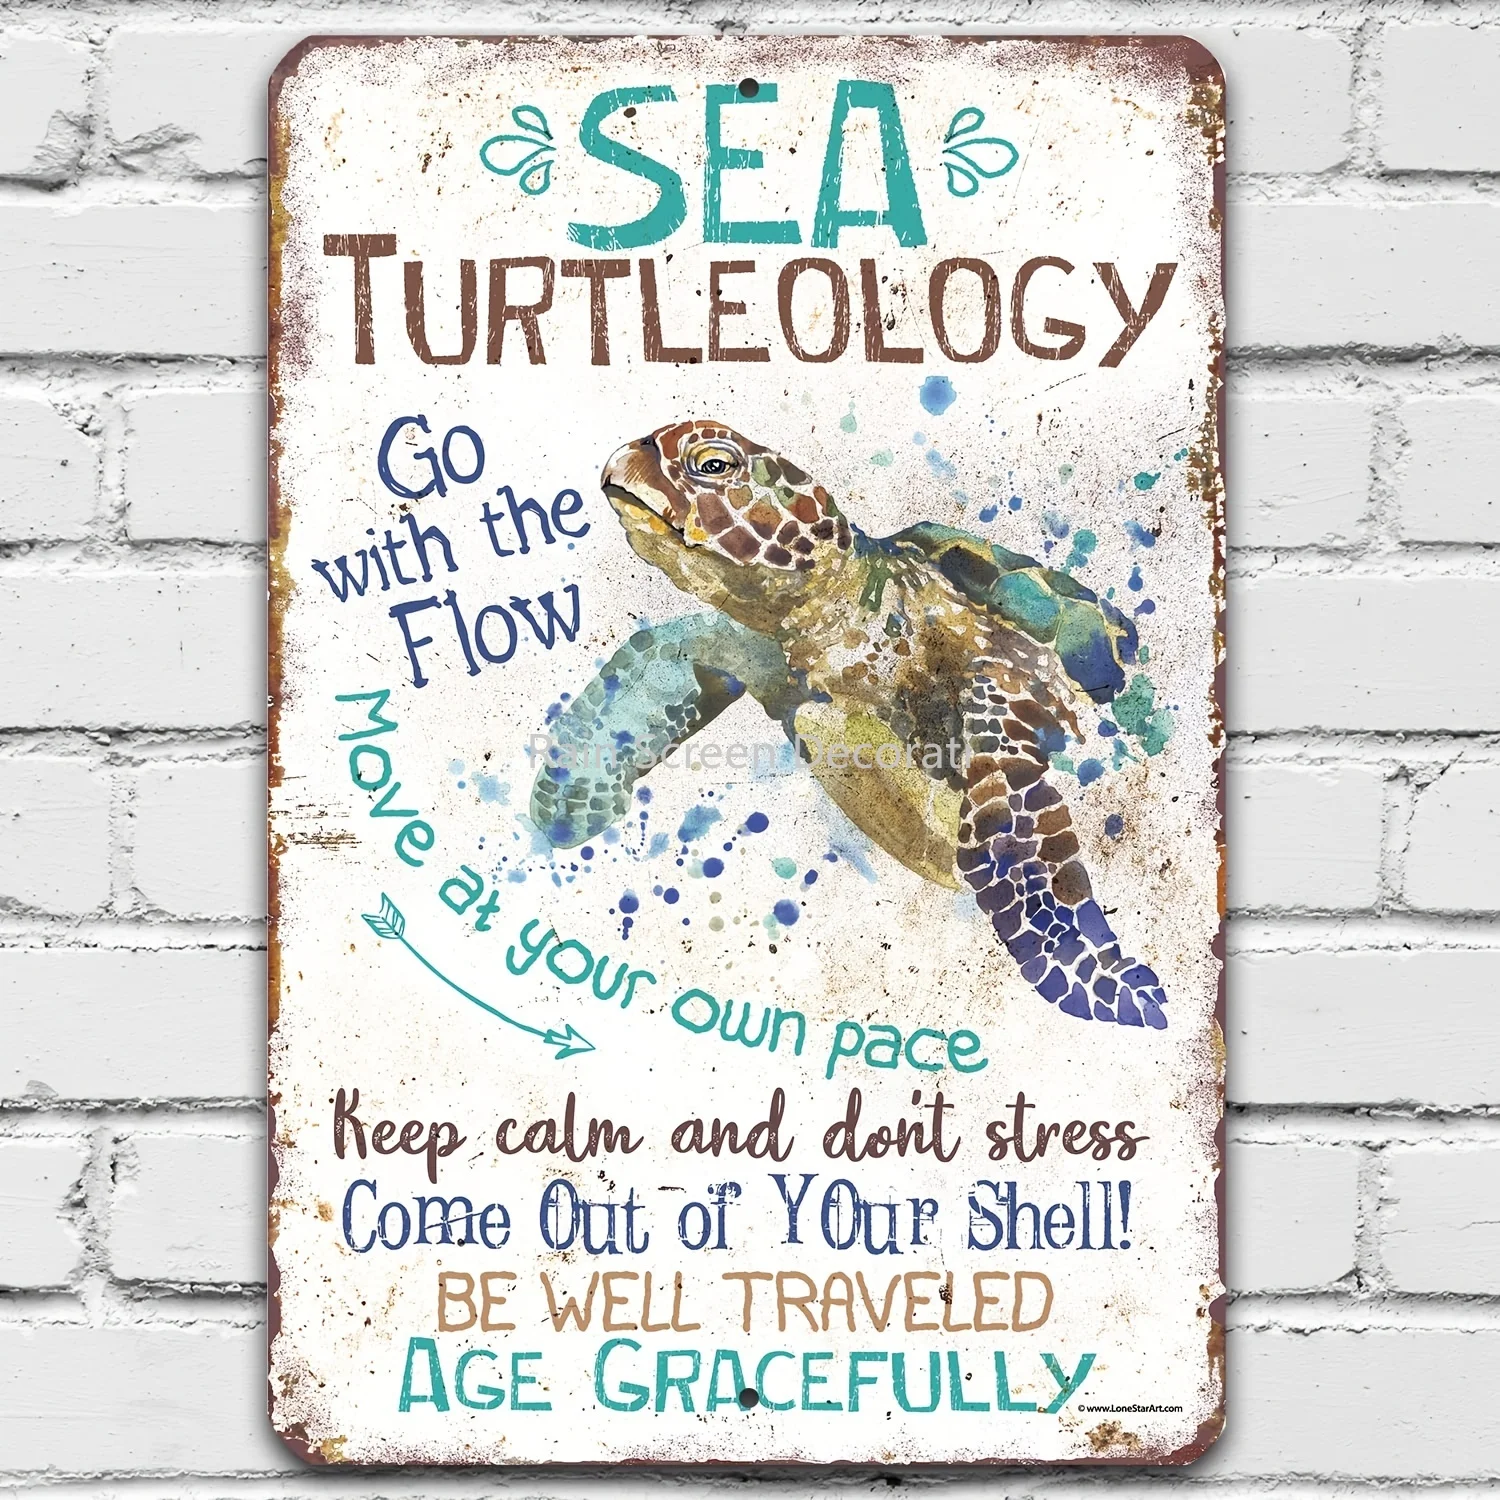 

Metal Sign - Sea Turtleology - Durable Turtles Metal Sign - Use Indoor/Outdoor - Great Inspirational Sea Turtle Themed Decor